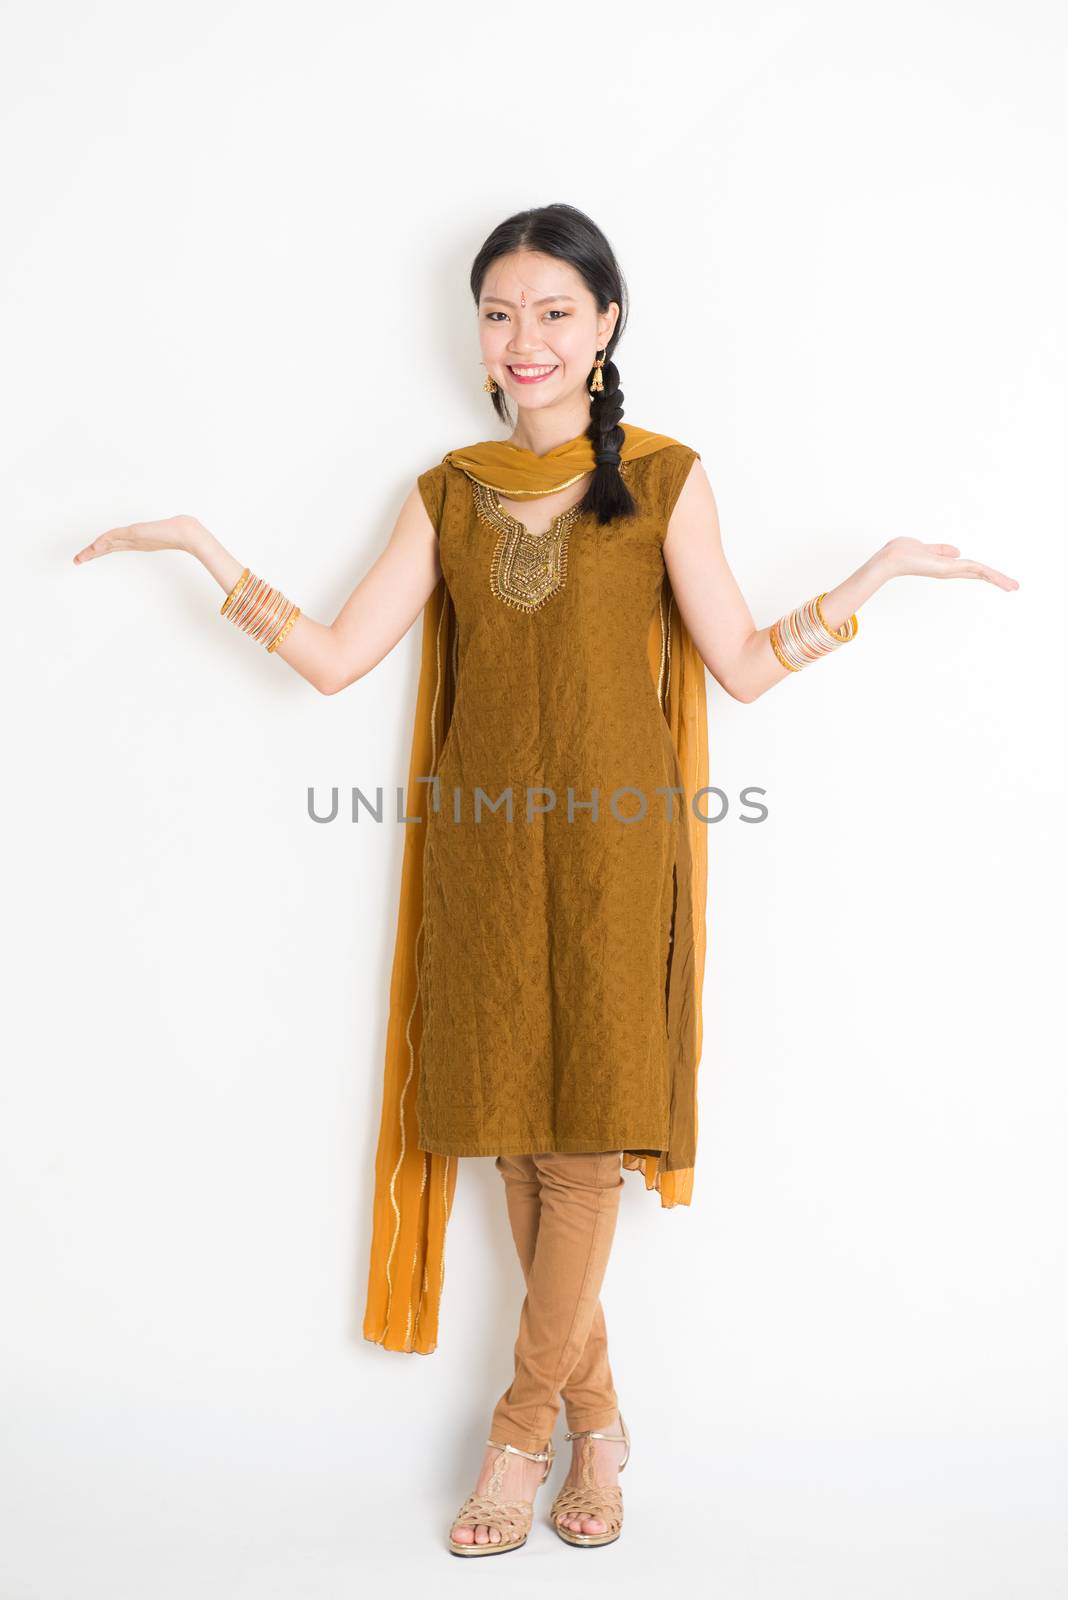 Portrait of young mixed race Indian Chinese woman in traditional punjabi dress hands showing somethings, full length standing on plain white background.